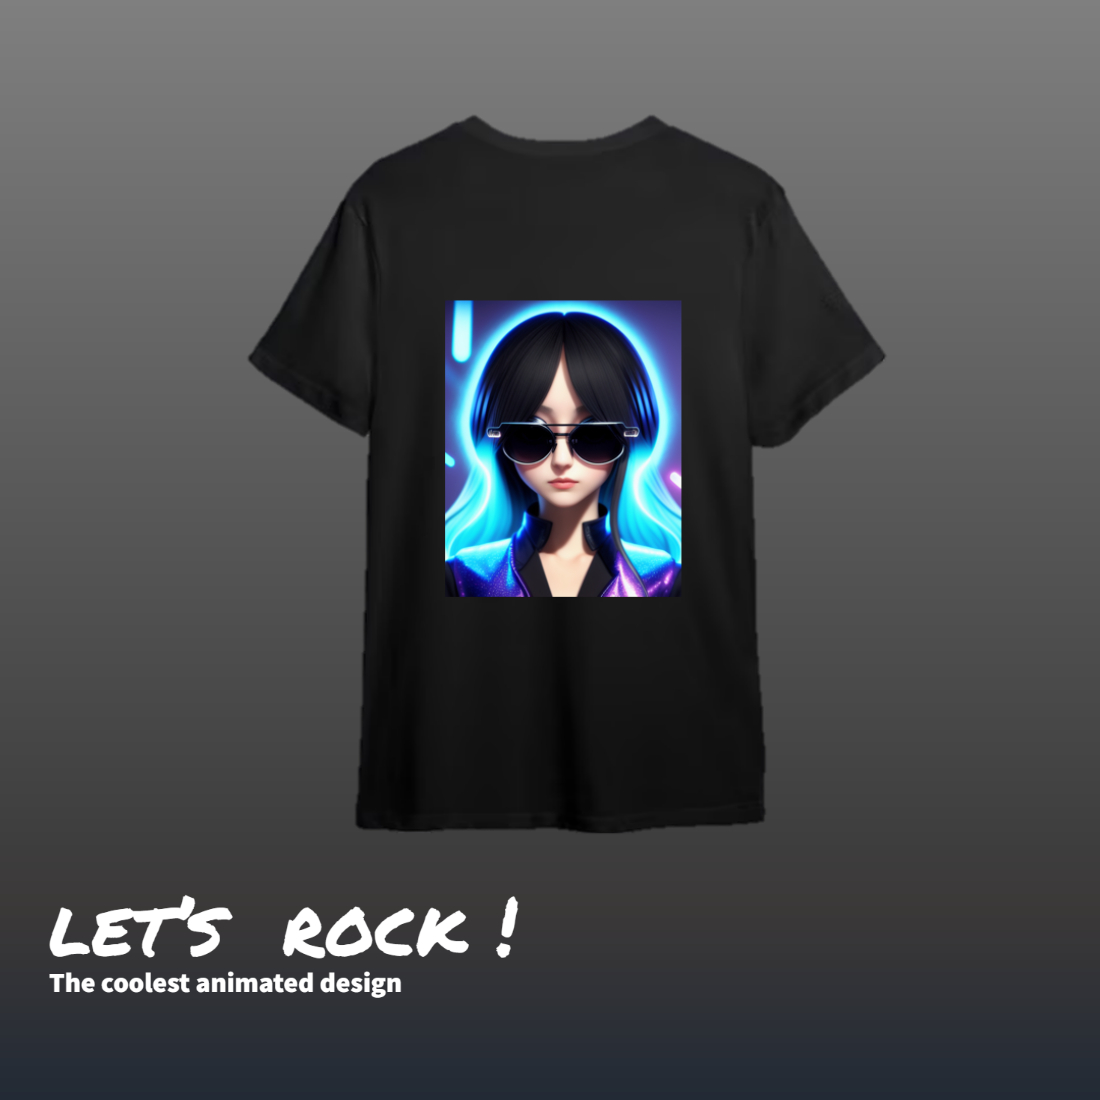 coolest animated t-shirt design to rock cover image.